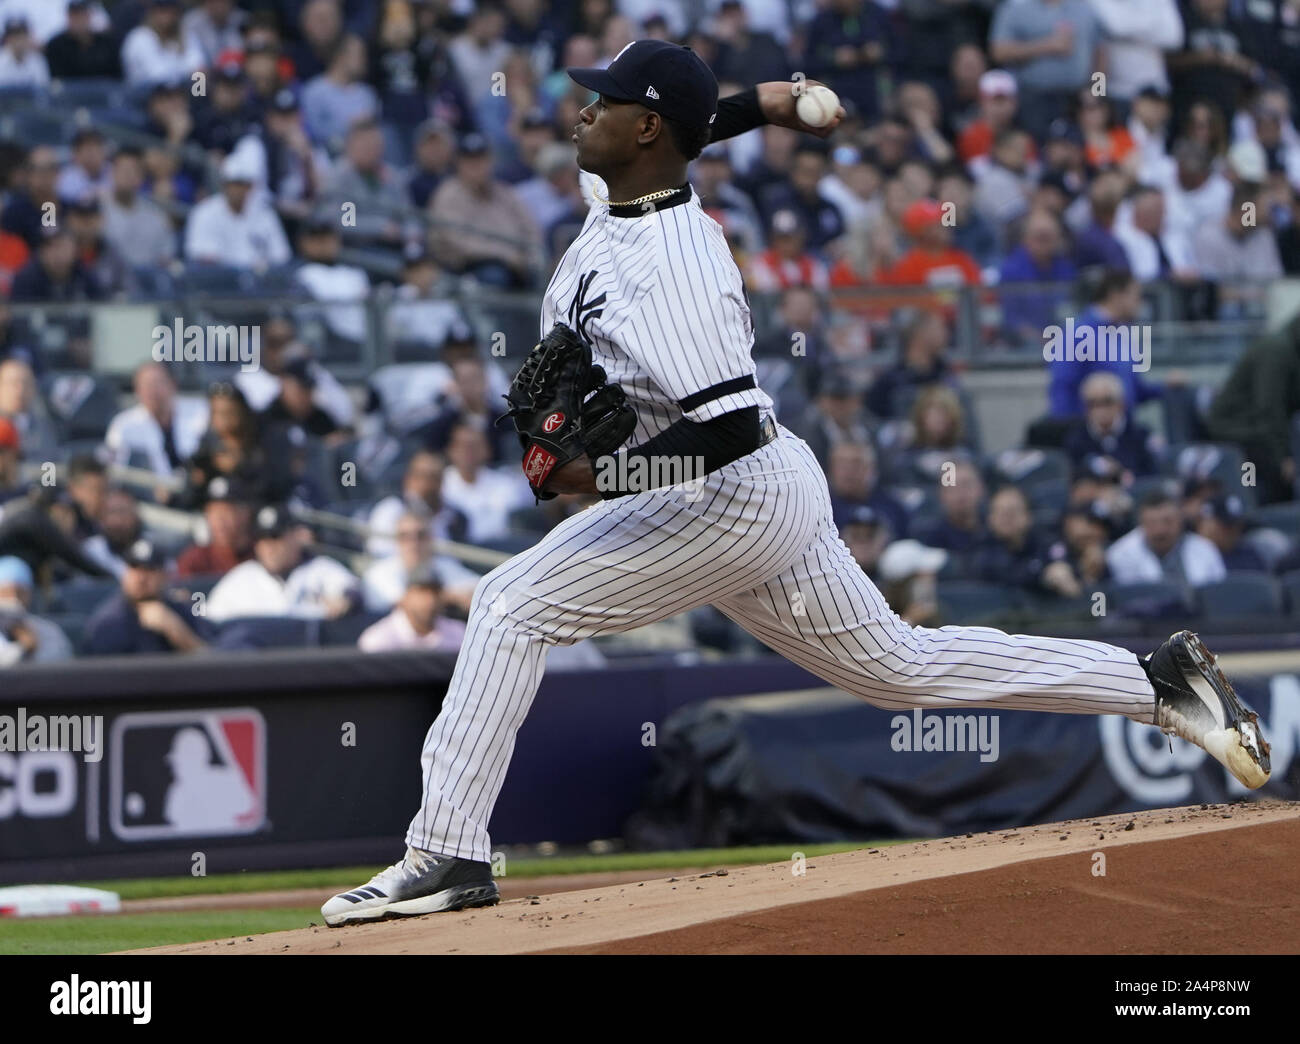 Bronx, United States. 15th Oct, 2019. New York Yankees Luis Severino pitches against the Houston Astros in the first inning of Game 3 of the American League Championship Series in the 2019 MLB Playoffs at Yankee Stadium in New York City on October 15, 2019. Photo by Ray Stubblebine/UPI Credit: UPI/Alamy Live News Stock Photo